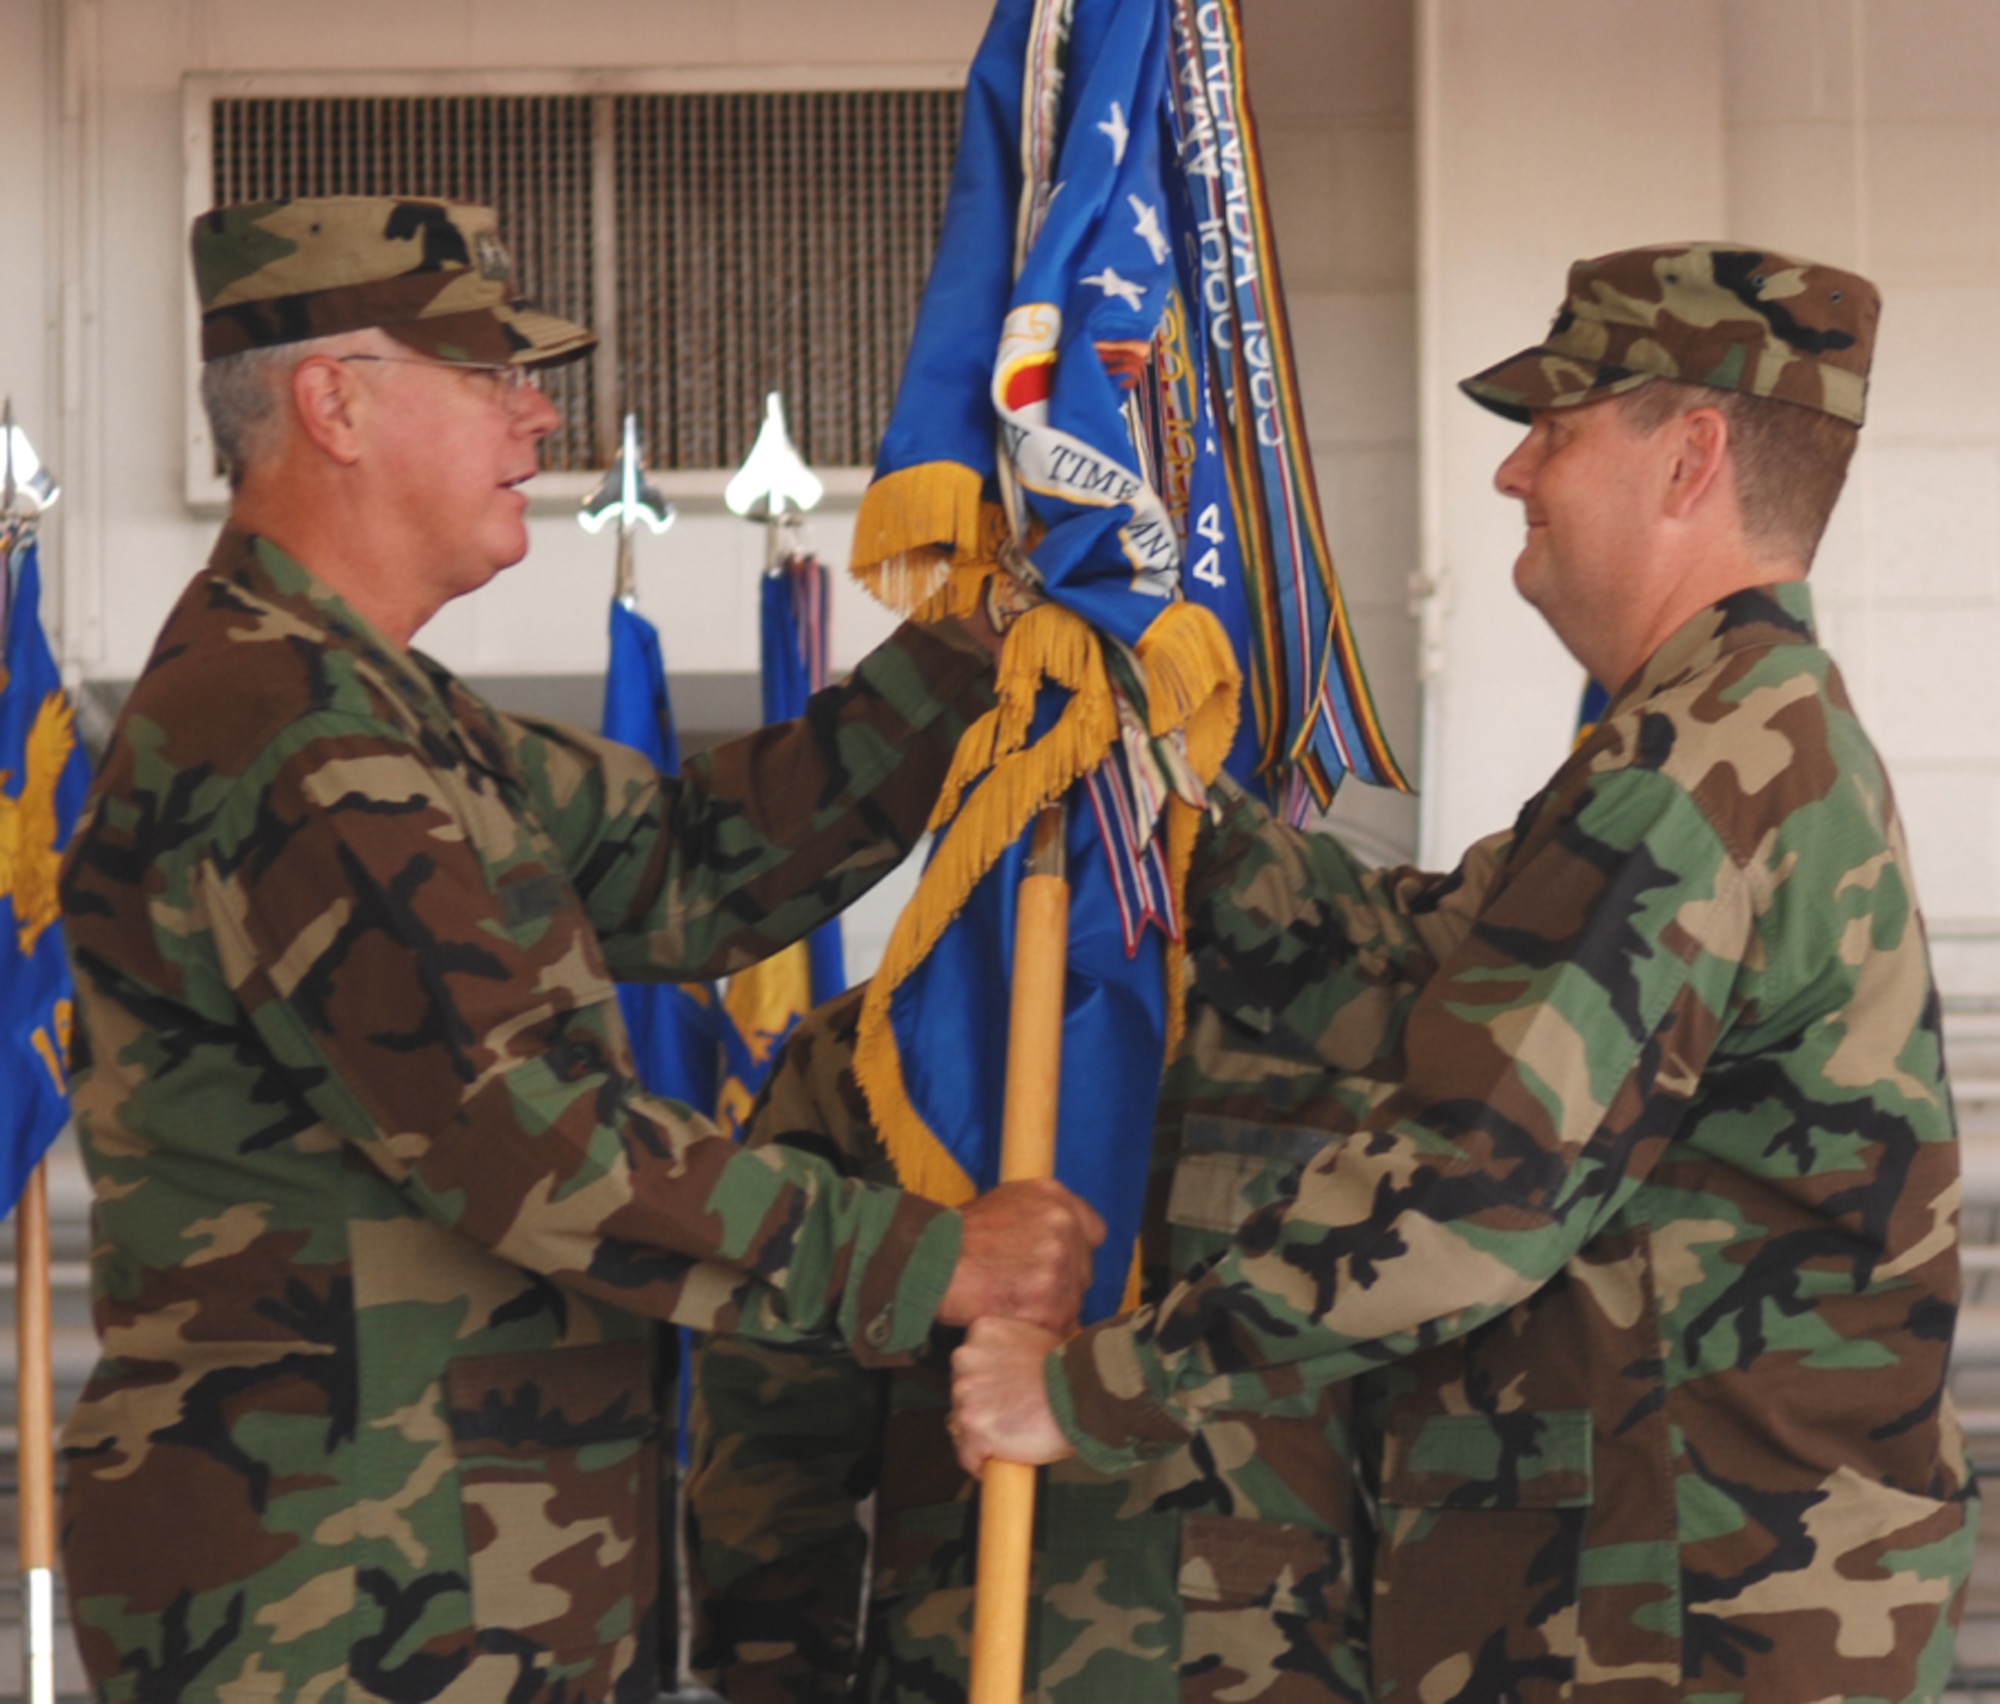 Lt. Gen. Michael Wooley, Air Force Special Operations Command commander, passes the 1st Special Operations Wing guidon to Col. Brad Webb, the new 1st SOW commander, during the change of command ceremony held Tuesday at Freedom Hangar. (U.S. Air Force photo by Senior Airman Andy Kin)